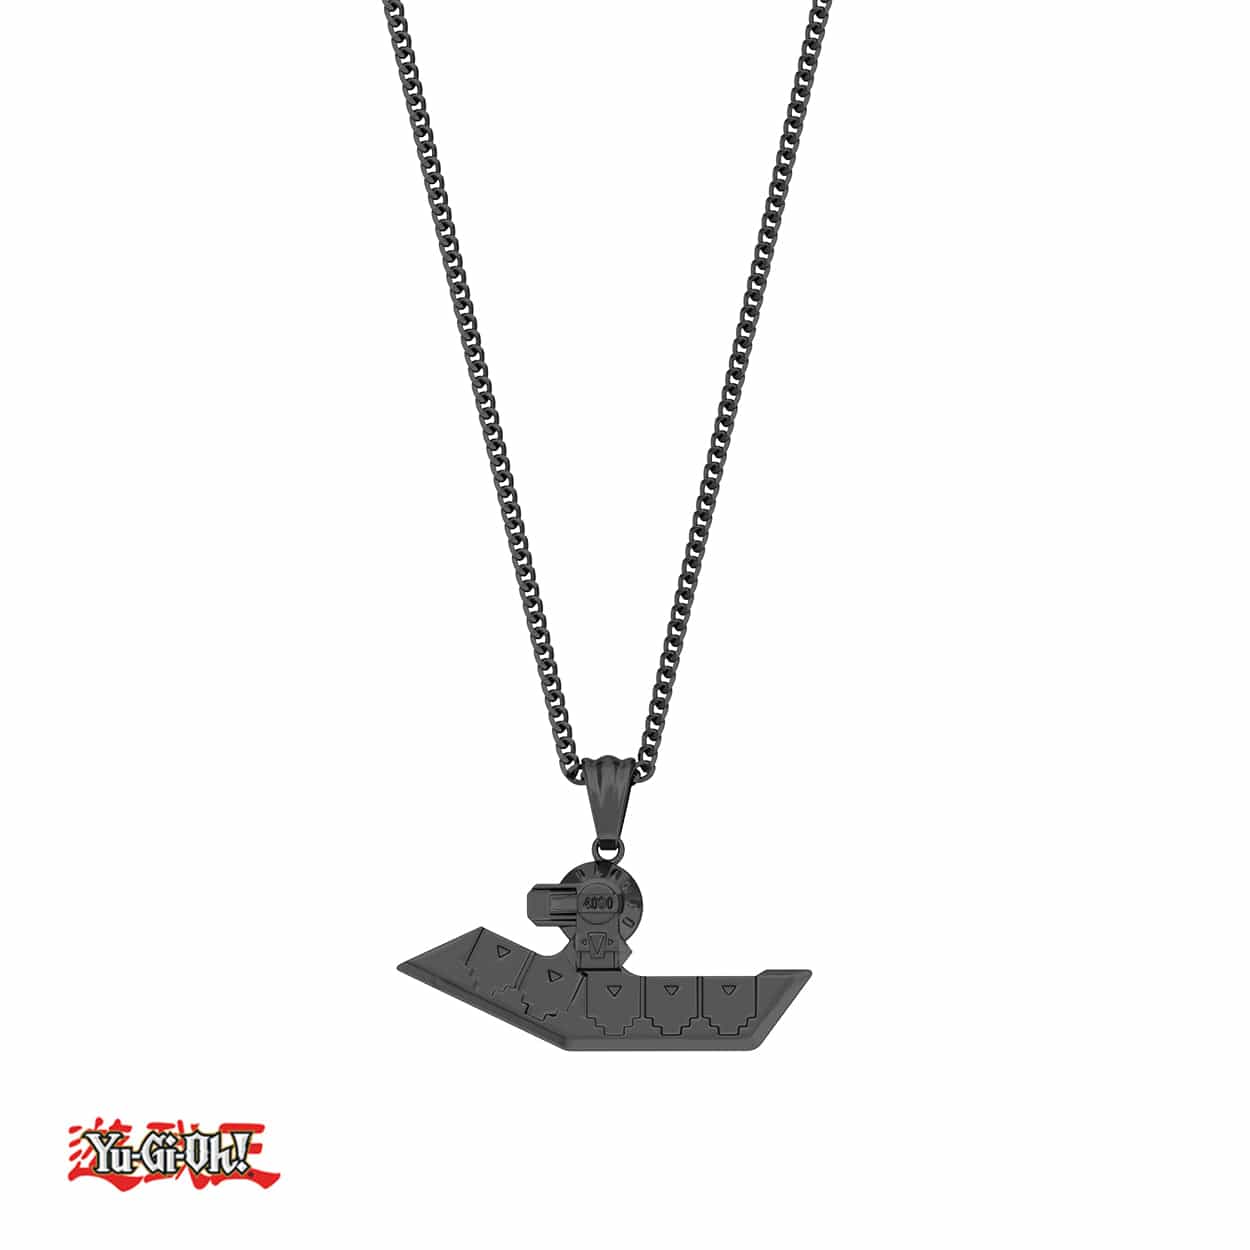 Yu-Gi-Oh!™ City Duel Disk Necklace